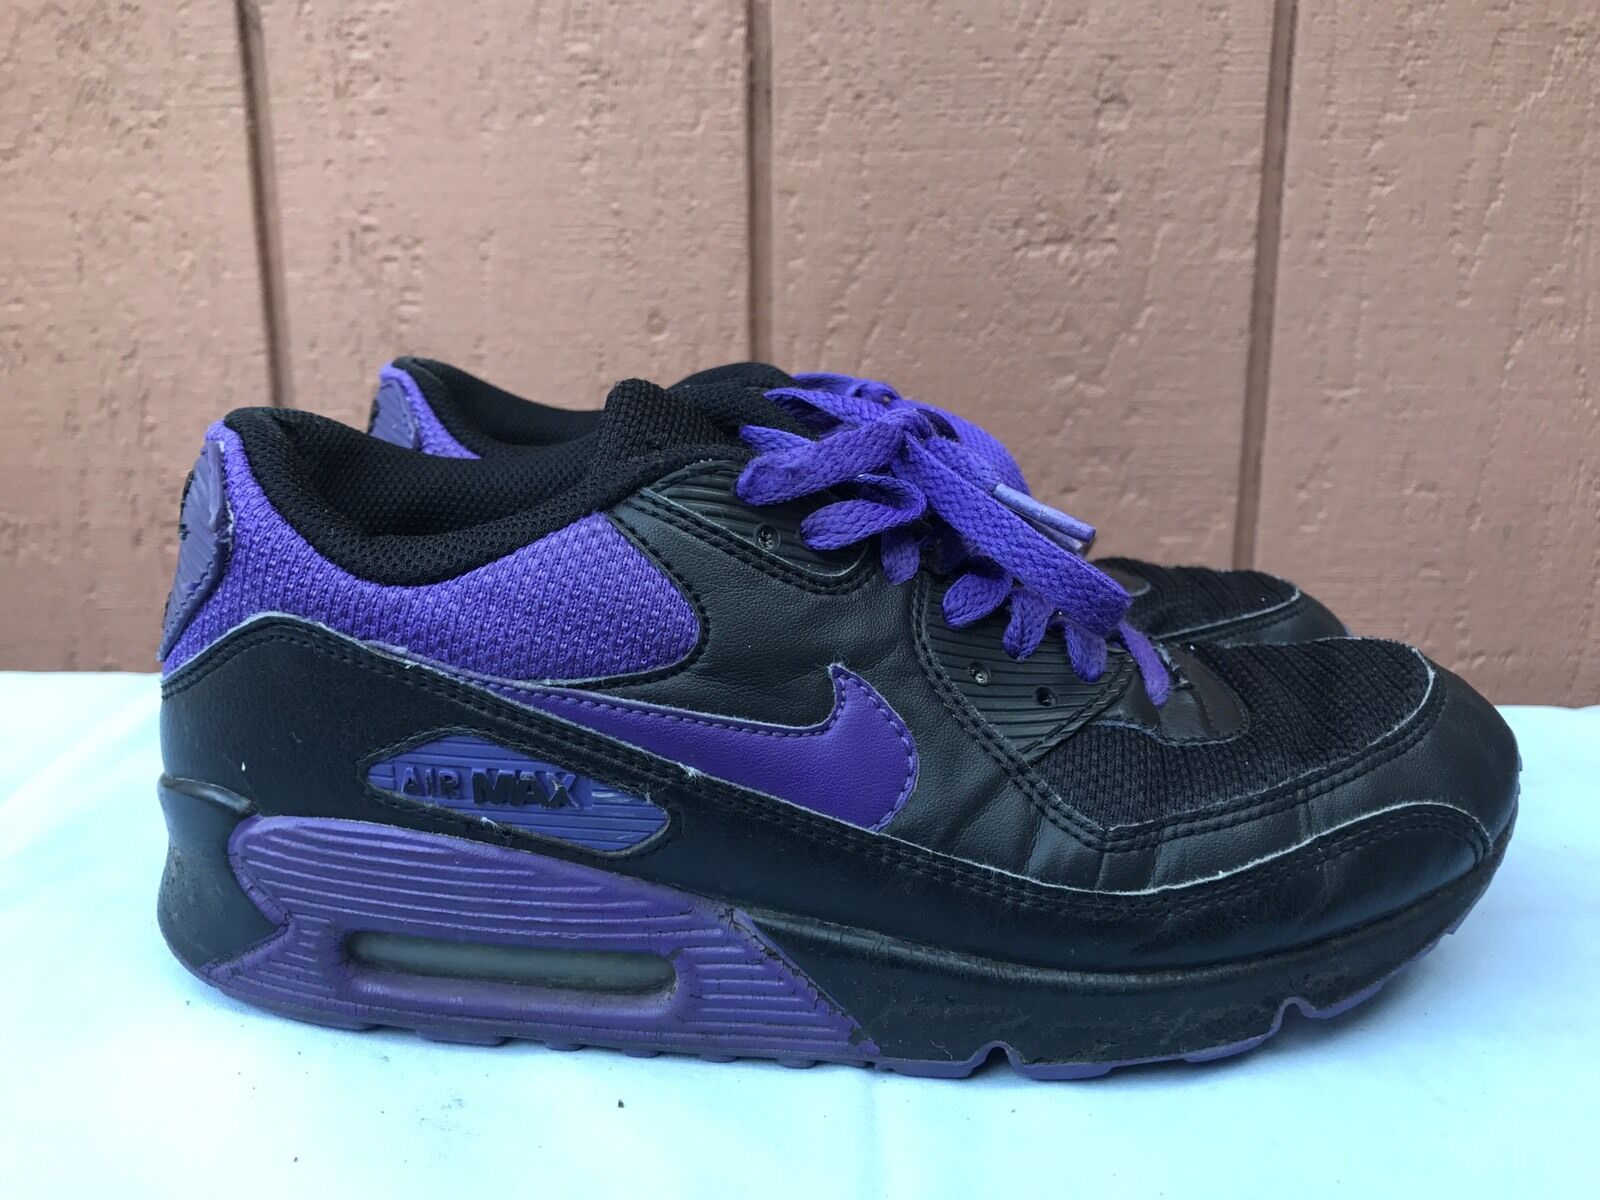 RARE NIKE WOMEN#039;S New arrival AIR MAX Soldering 90 RUNNING PURPLE 325 SHOES BLACK